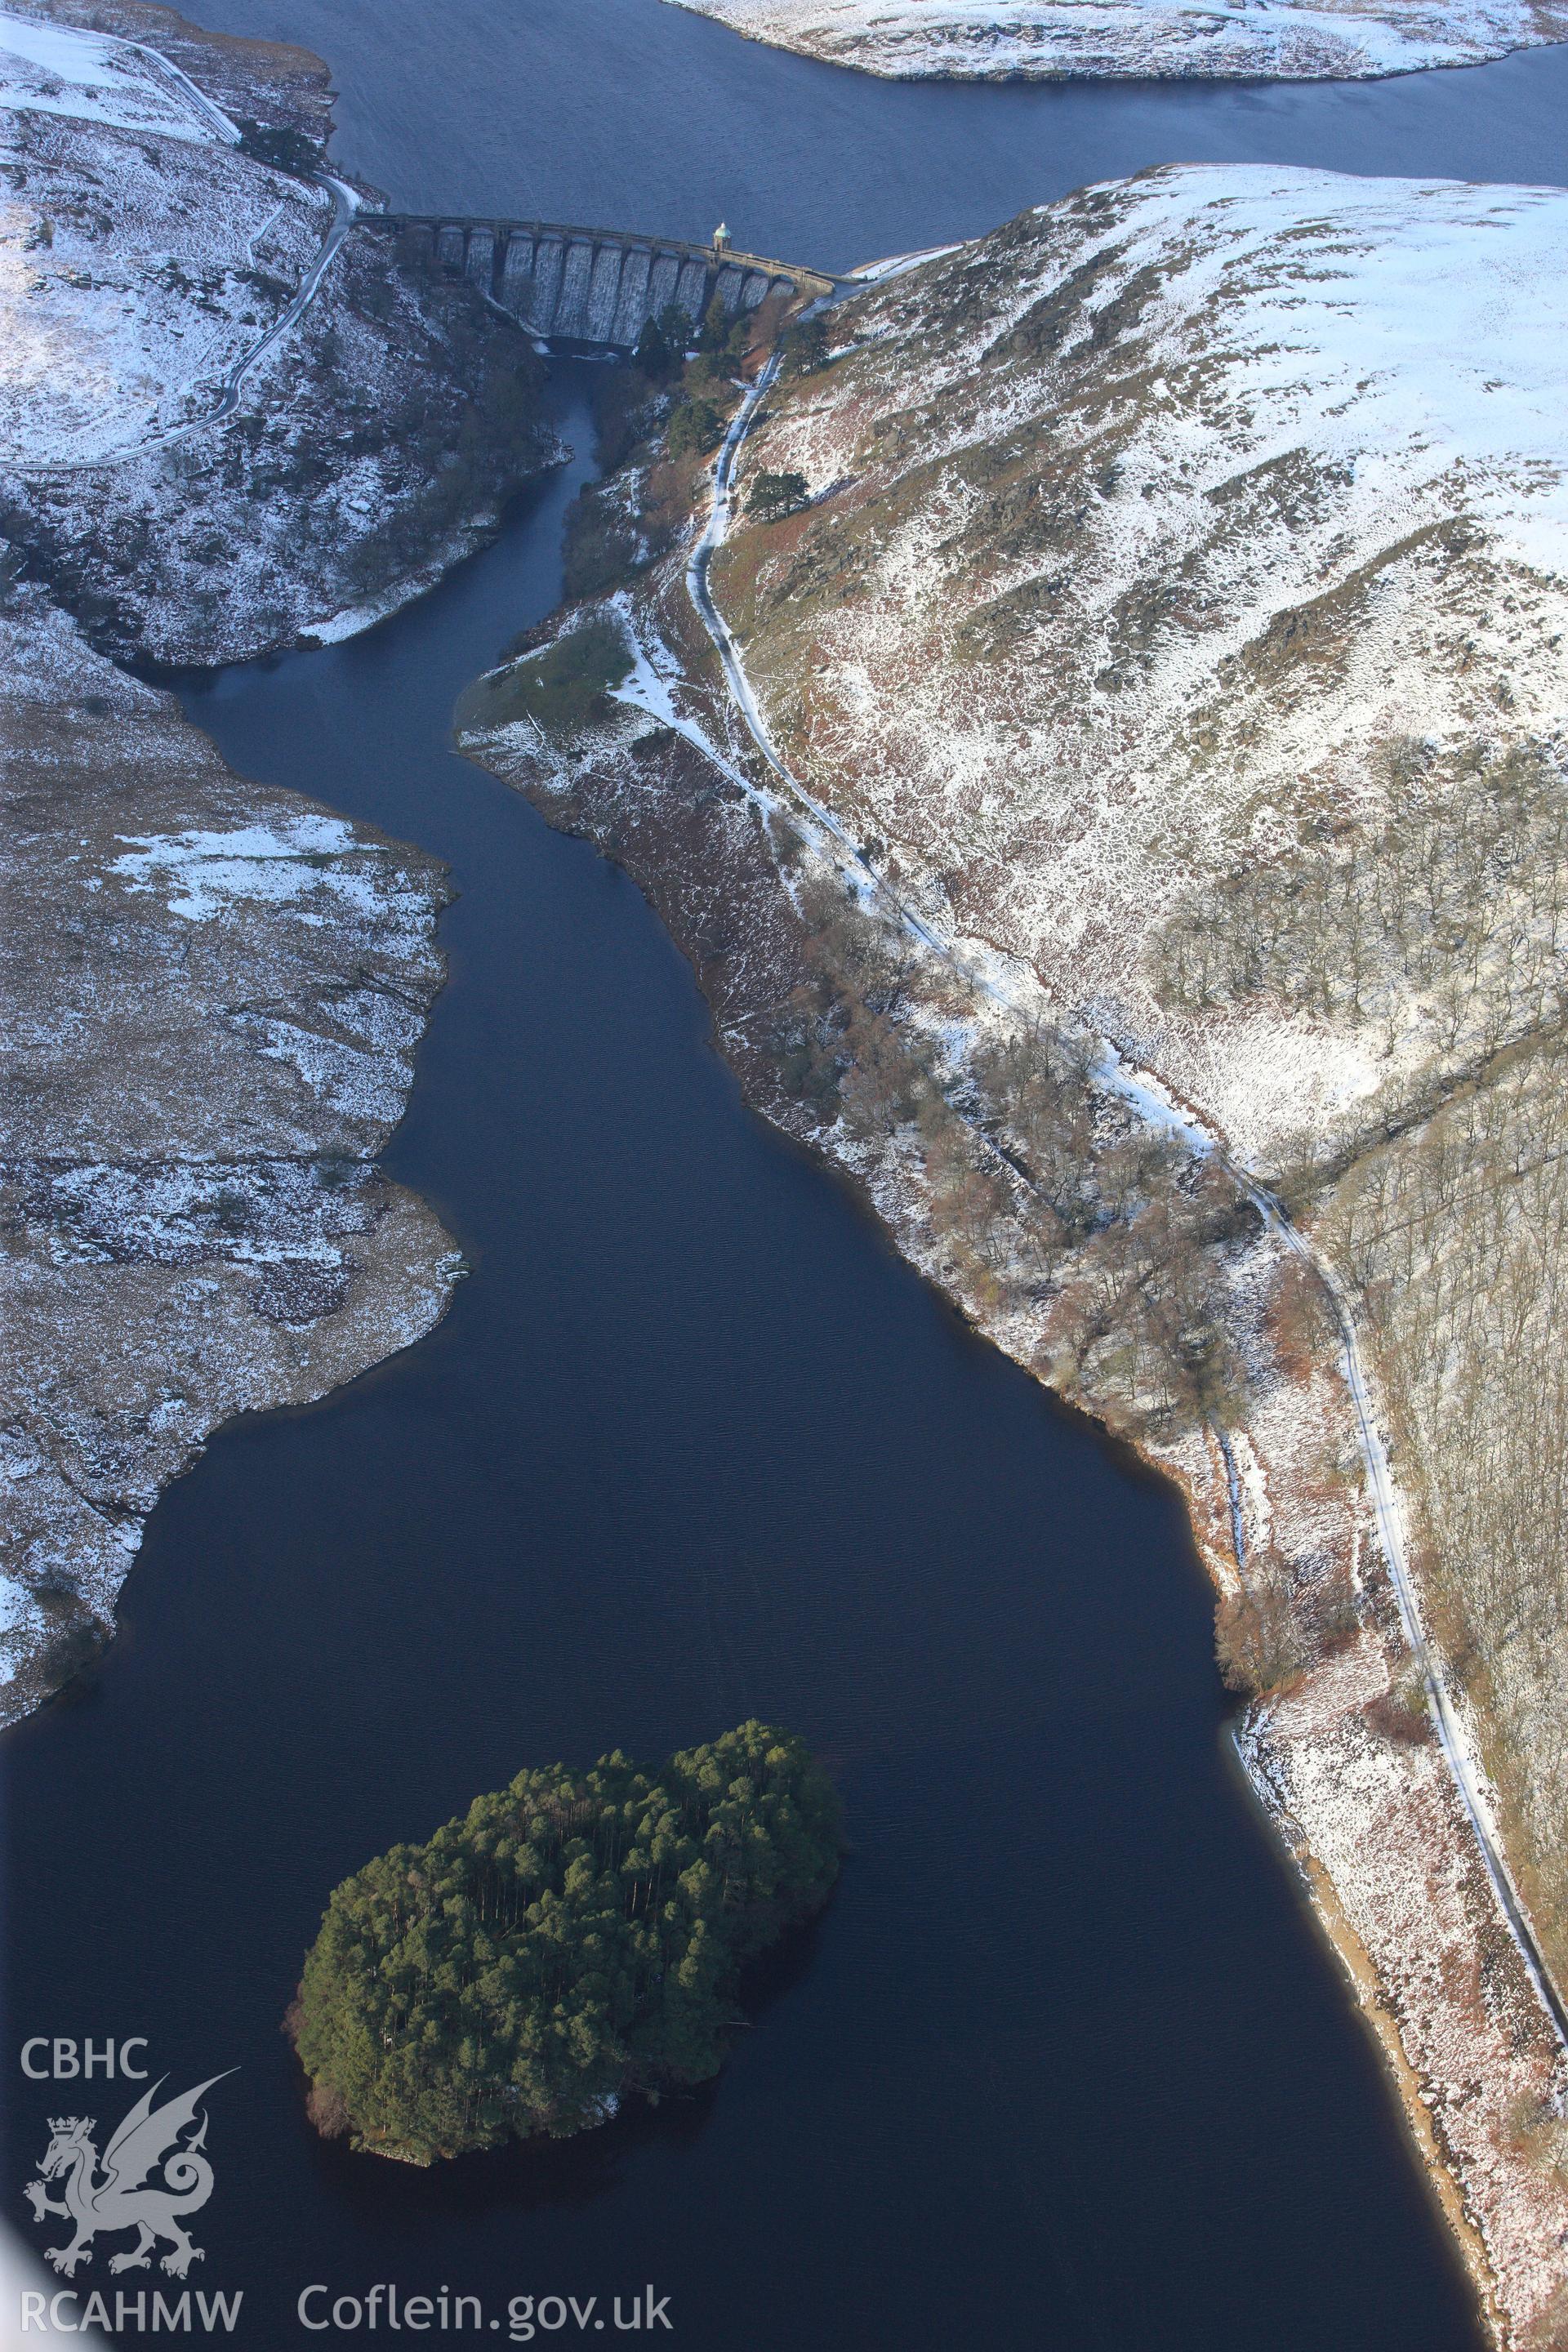 RCAHMW colour oblique photograph of Craig Goch Dam, view from south-east. Taken by Toby Driver on 18/12/2011.